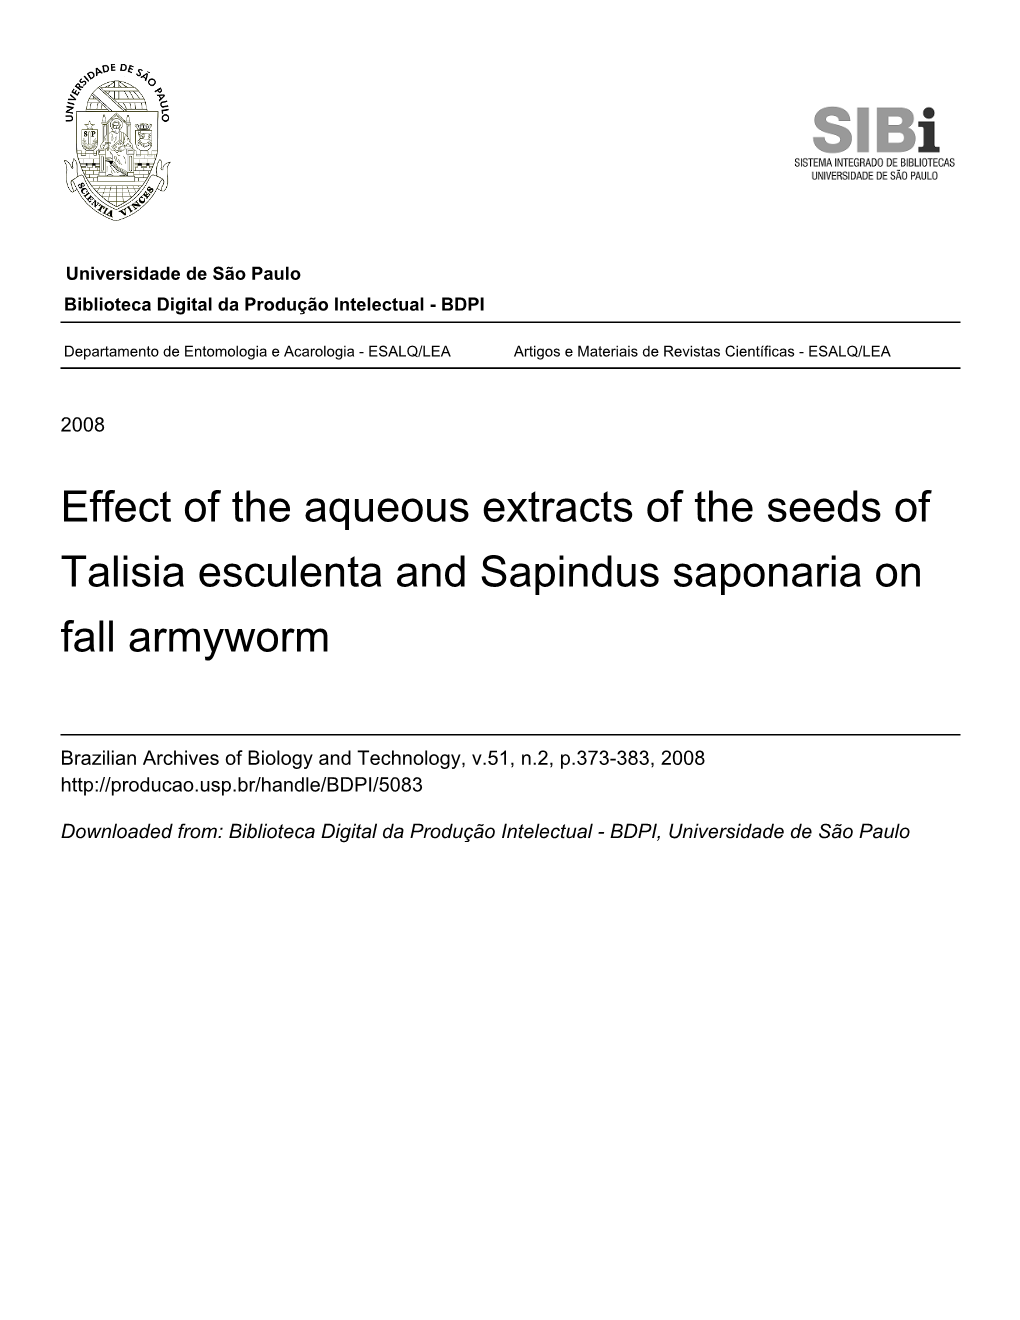 Effect of the Aqueous Extracts of the Seeds of Talisia Esculenta and Sapindus Saponaria on Fall Armyworm